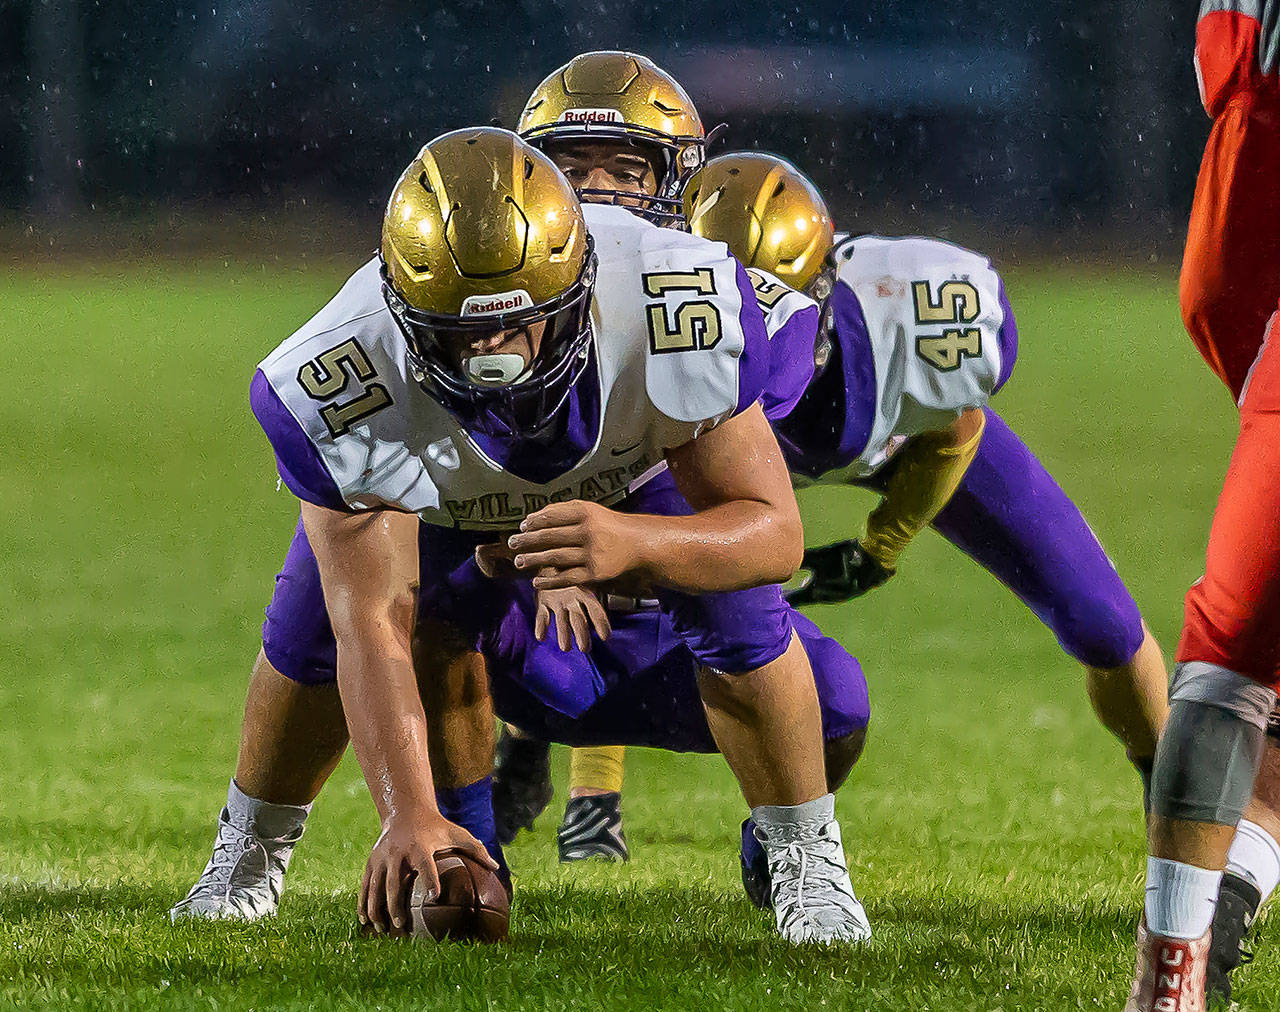 Nathaneil Nunez prepares to hike to Caleb Fitzgerald as Caden Leckelt waits in the Wildcat backfield.(Photo by John Fisken)